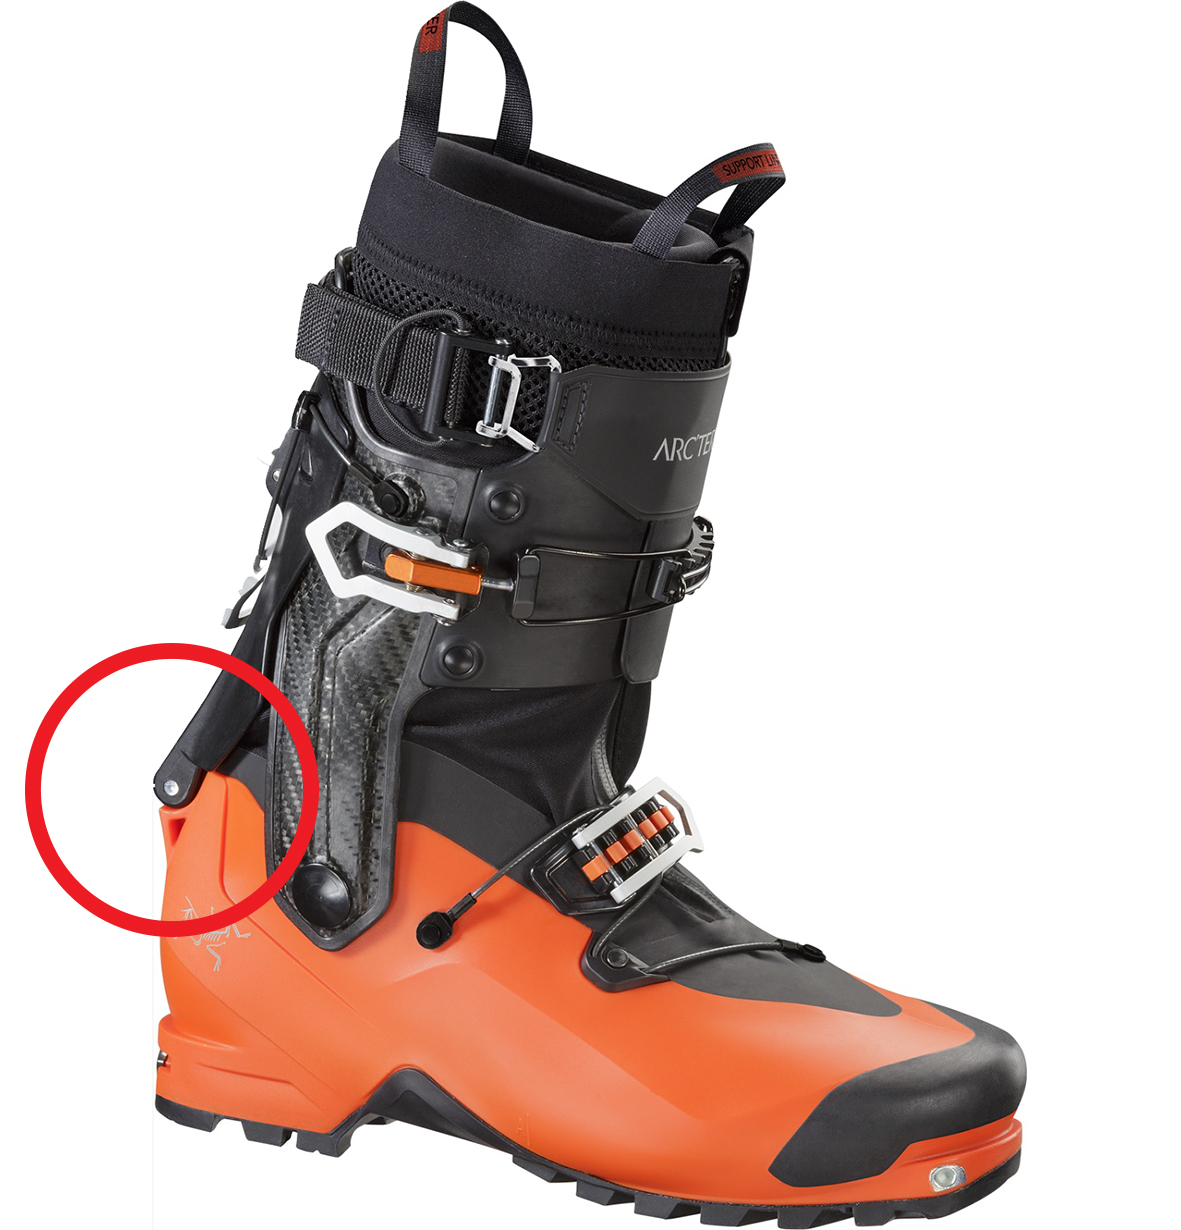 Blister Gear Review covers the Arc'teryx Procline ski boot recall